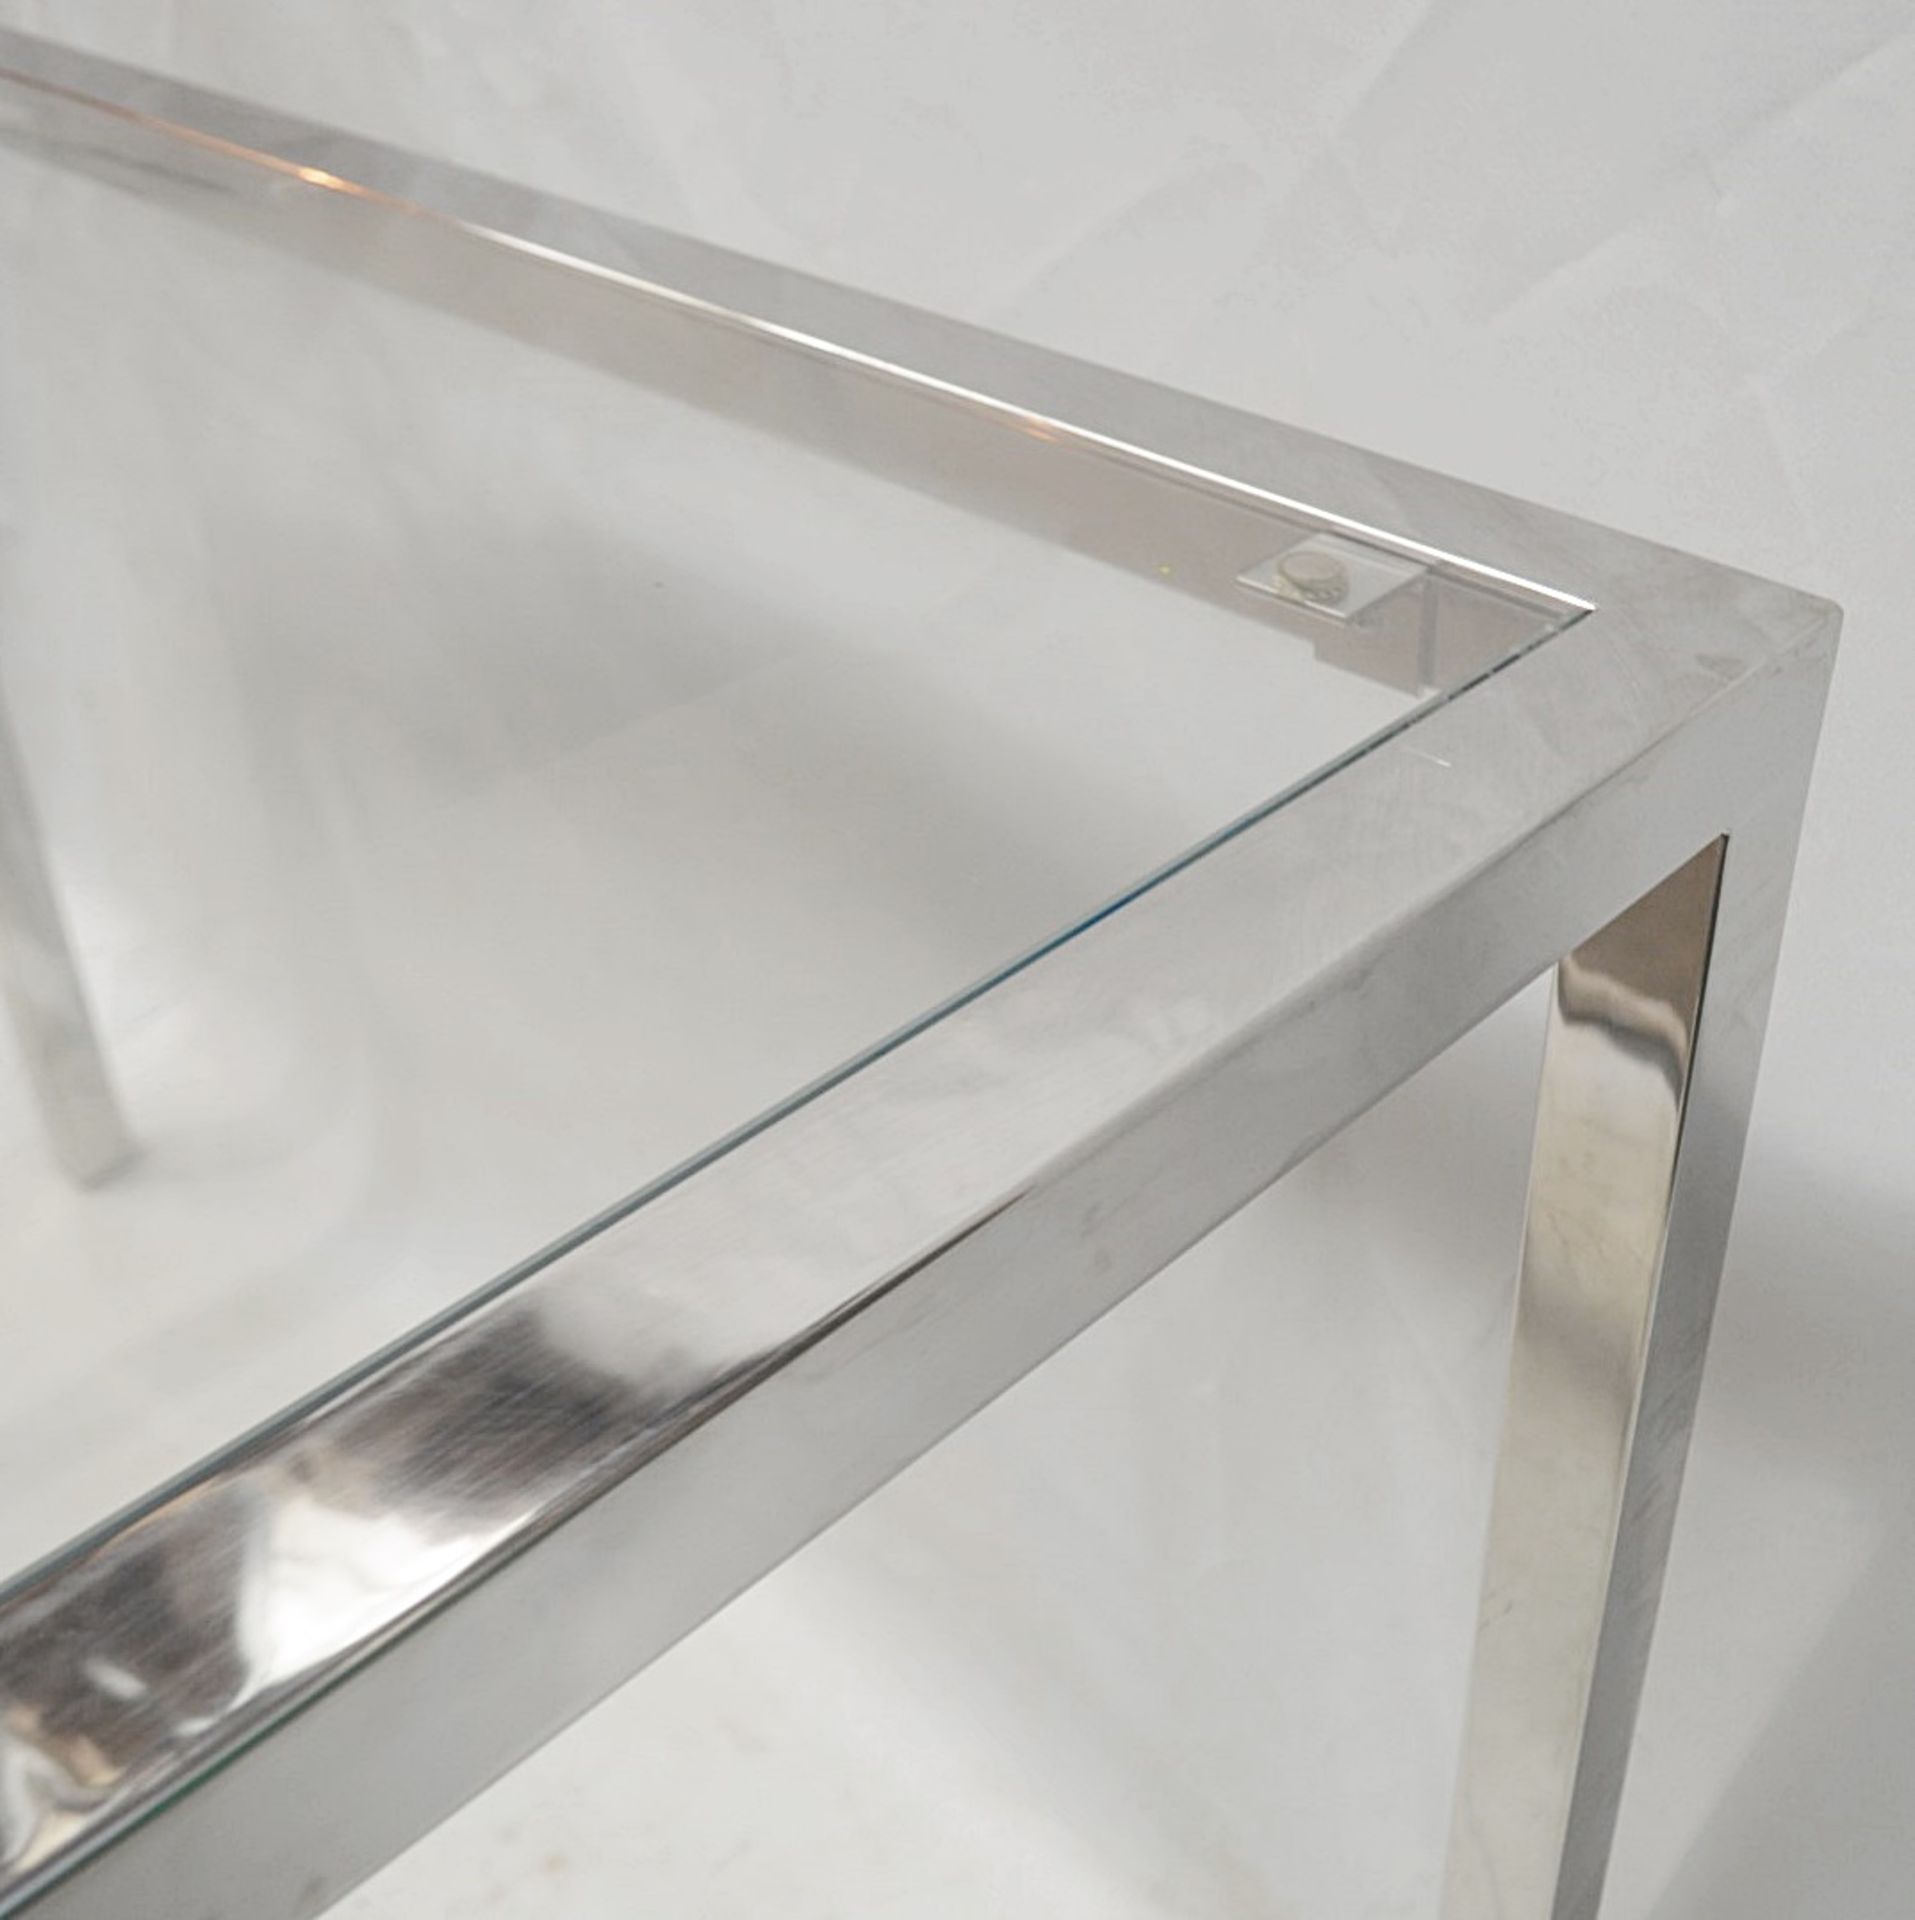 1 x Rectangular Glass Topped Retail Display Table - Dimensions: H92 x W135 x D90cm - Ex-Display - Image 2 of 4